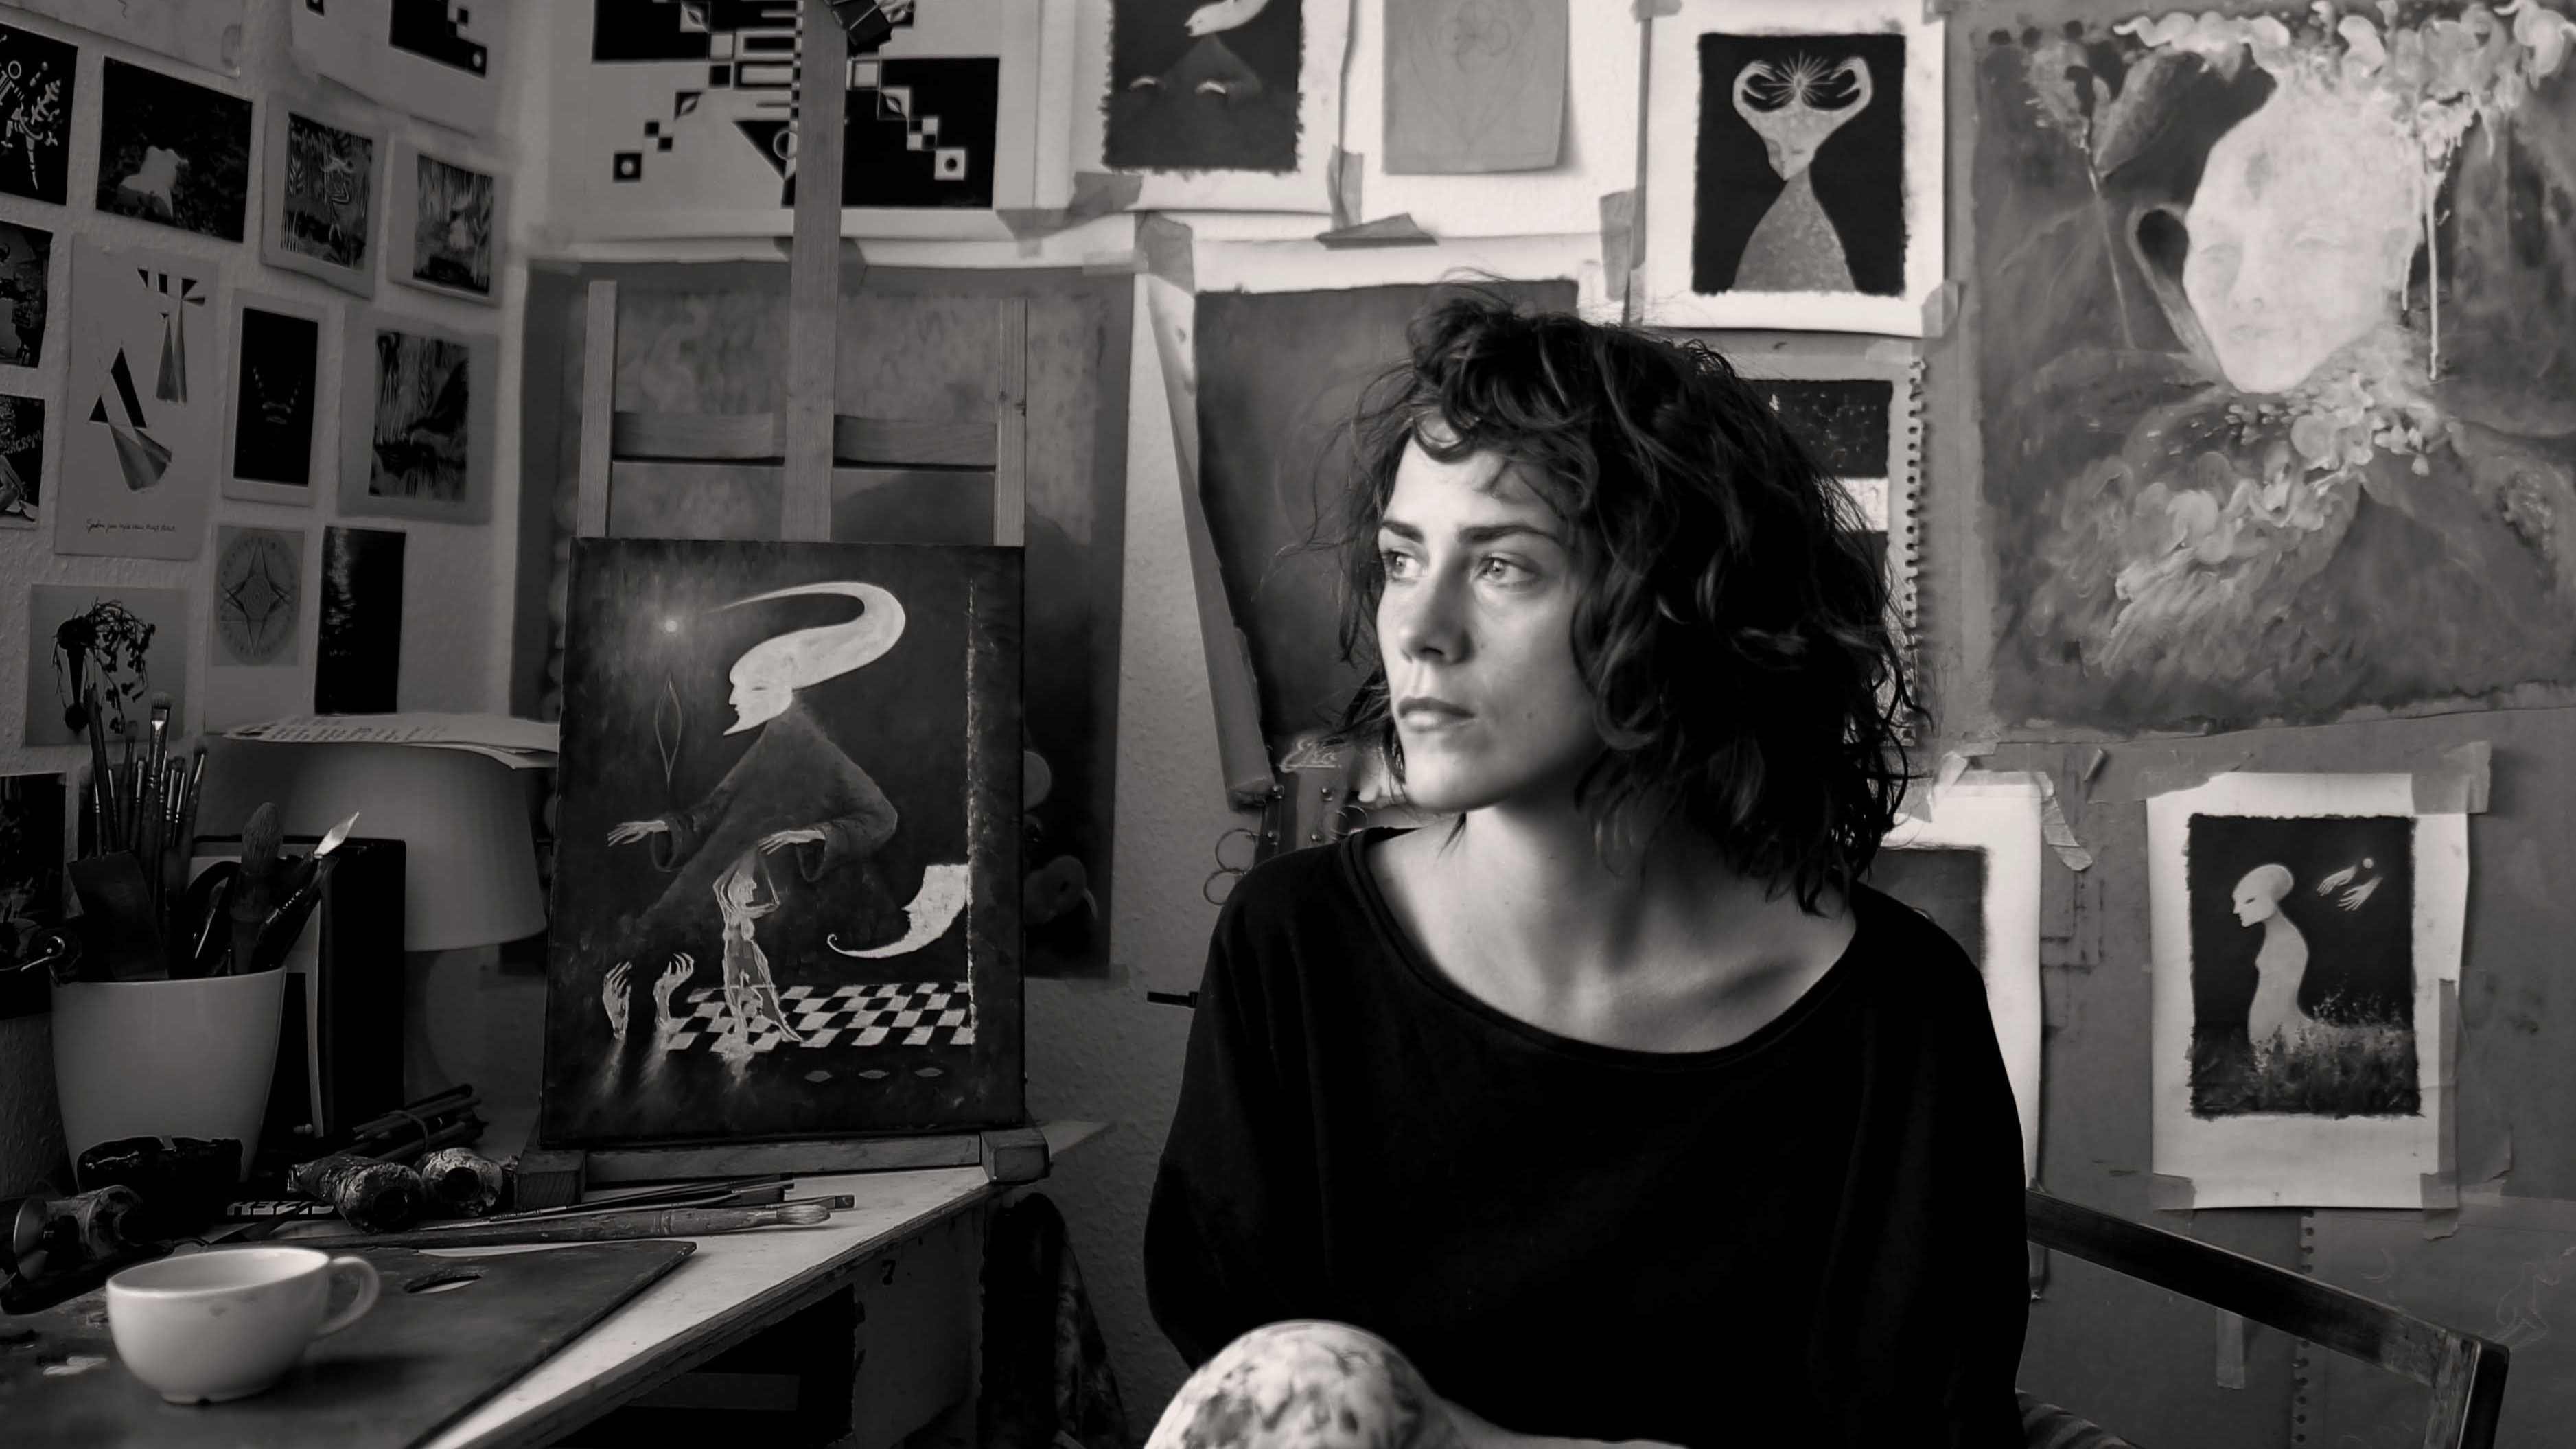 Black and white image of a woman with short dark curly hairy gazing out of a window. The wall behind her is covered in various paintings, drawings, and sketches. She is sat at a desk.